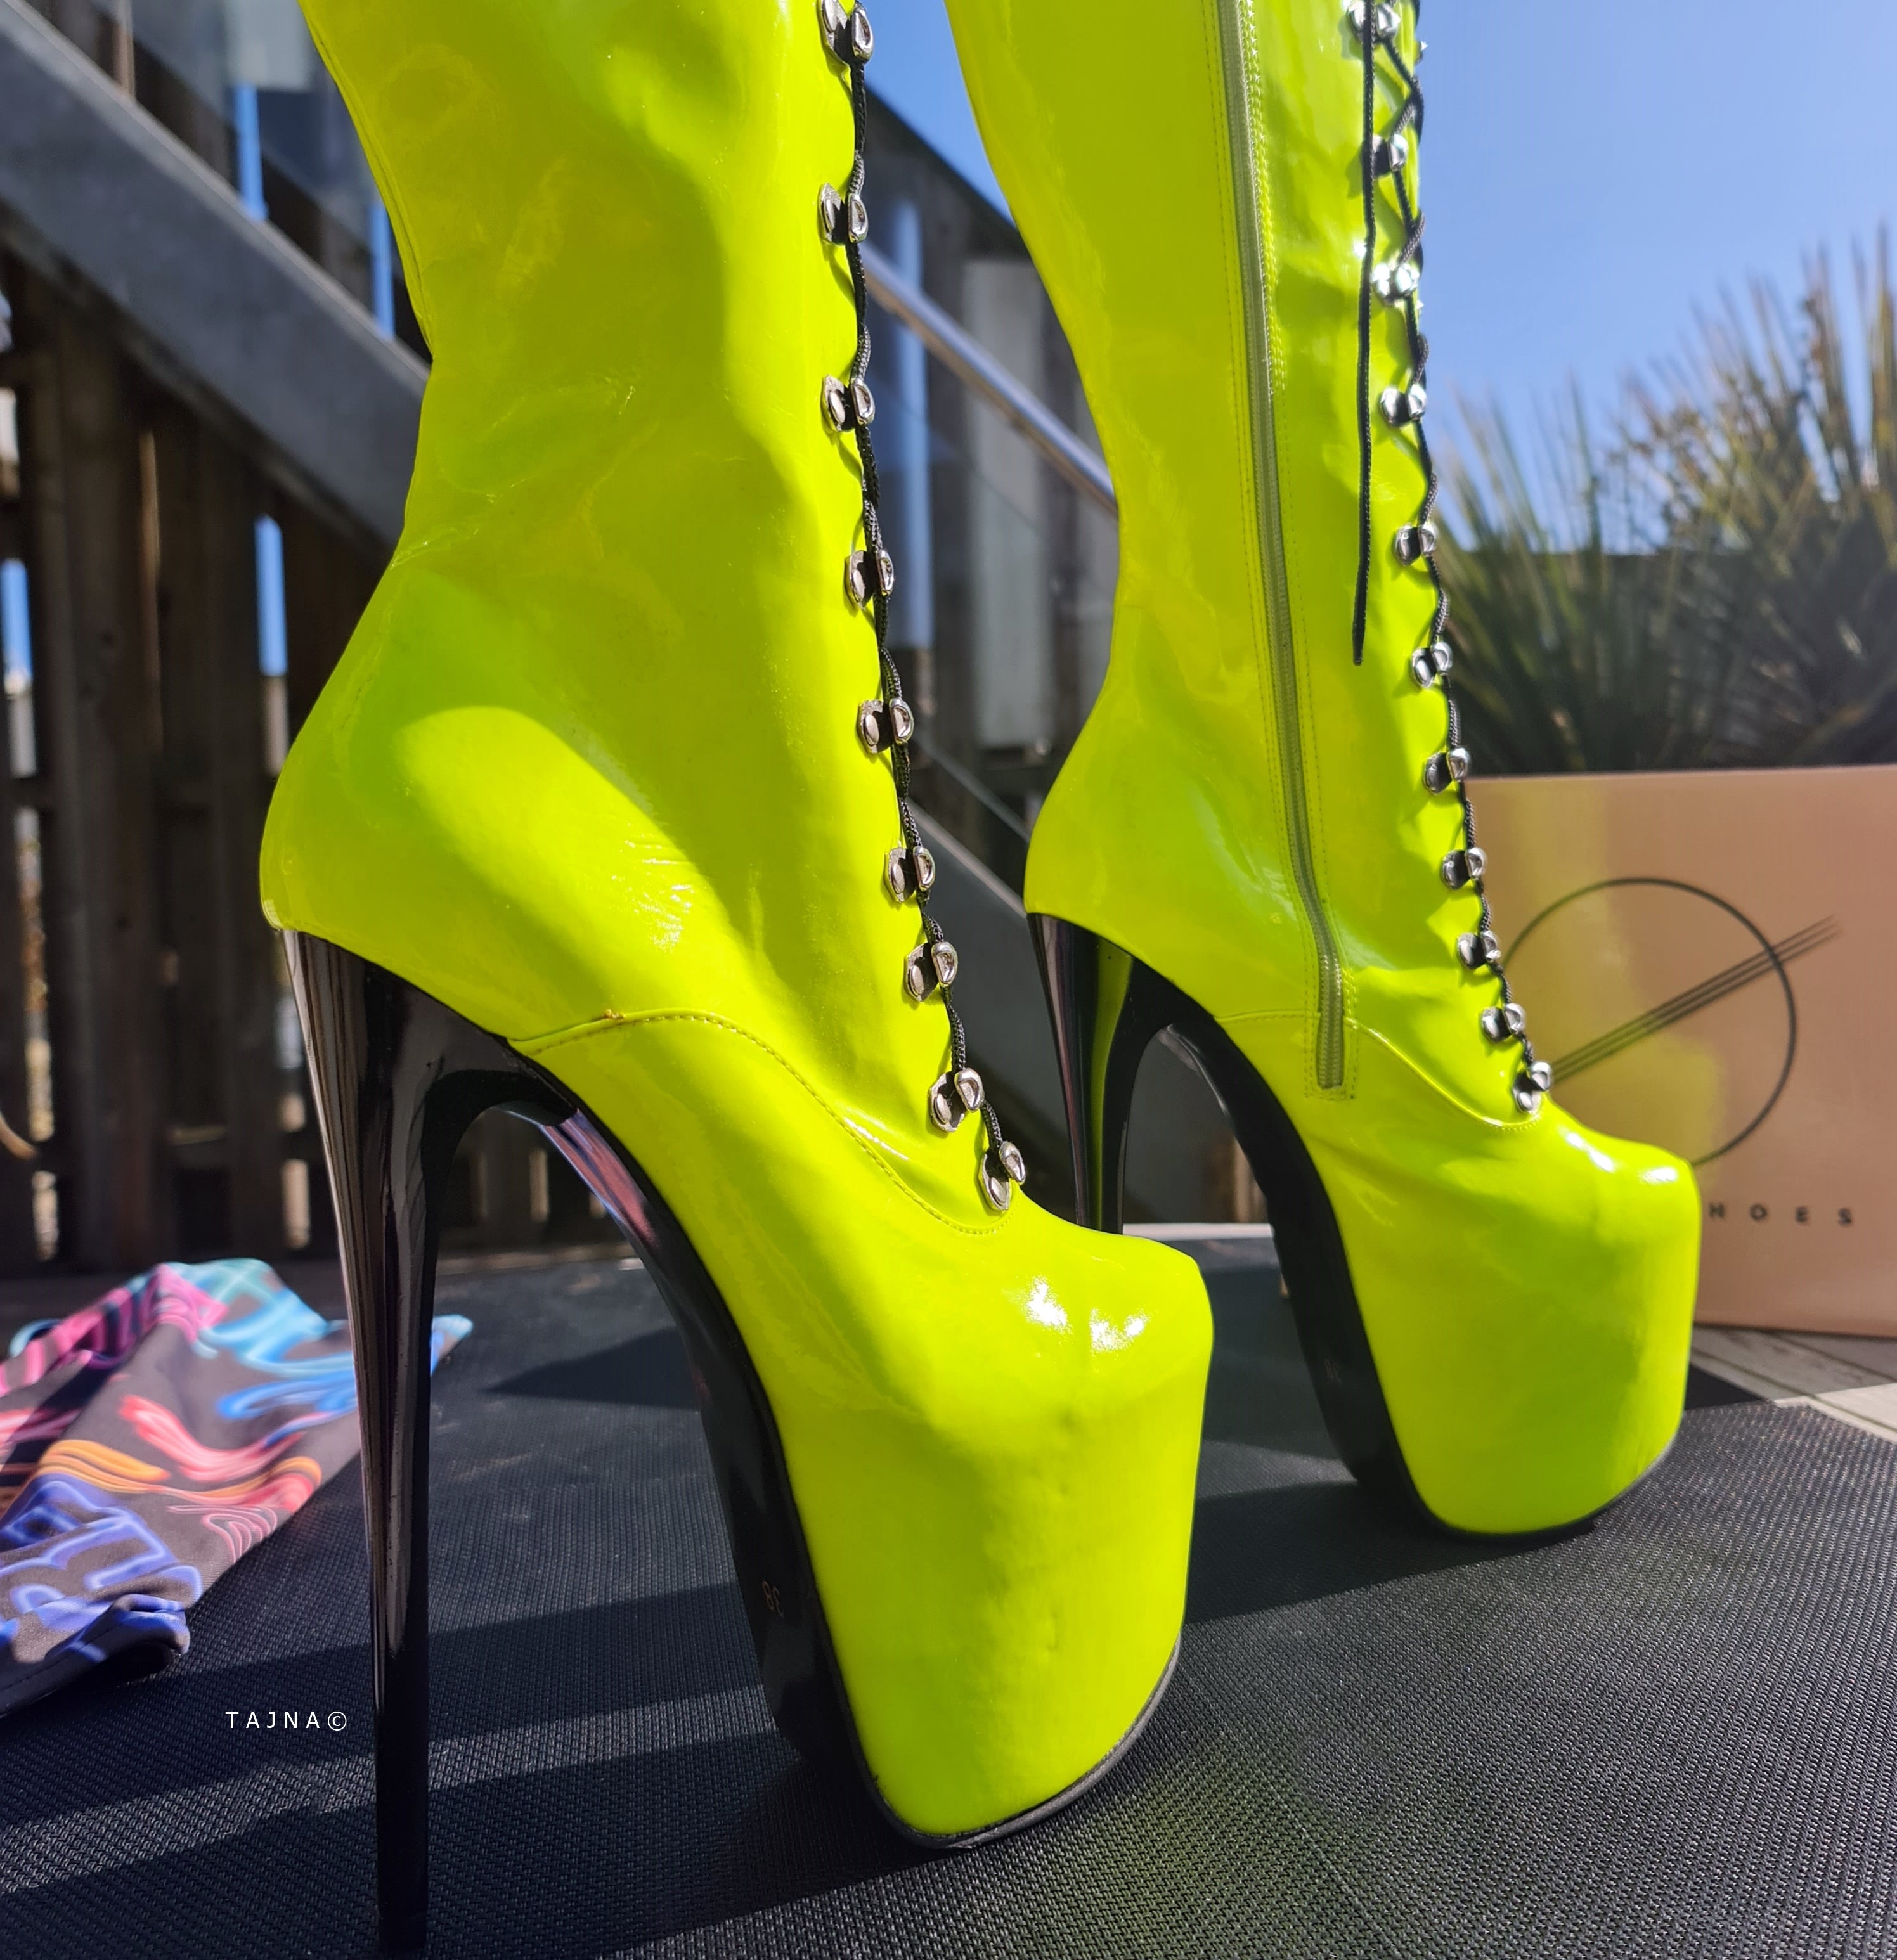 Neon Yellow Chunky Heeled Strappy Sandals | SHEIN